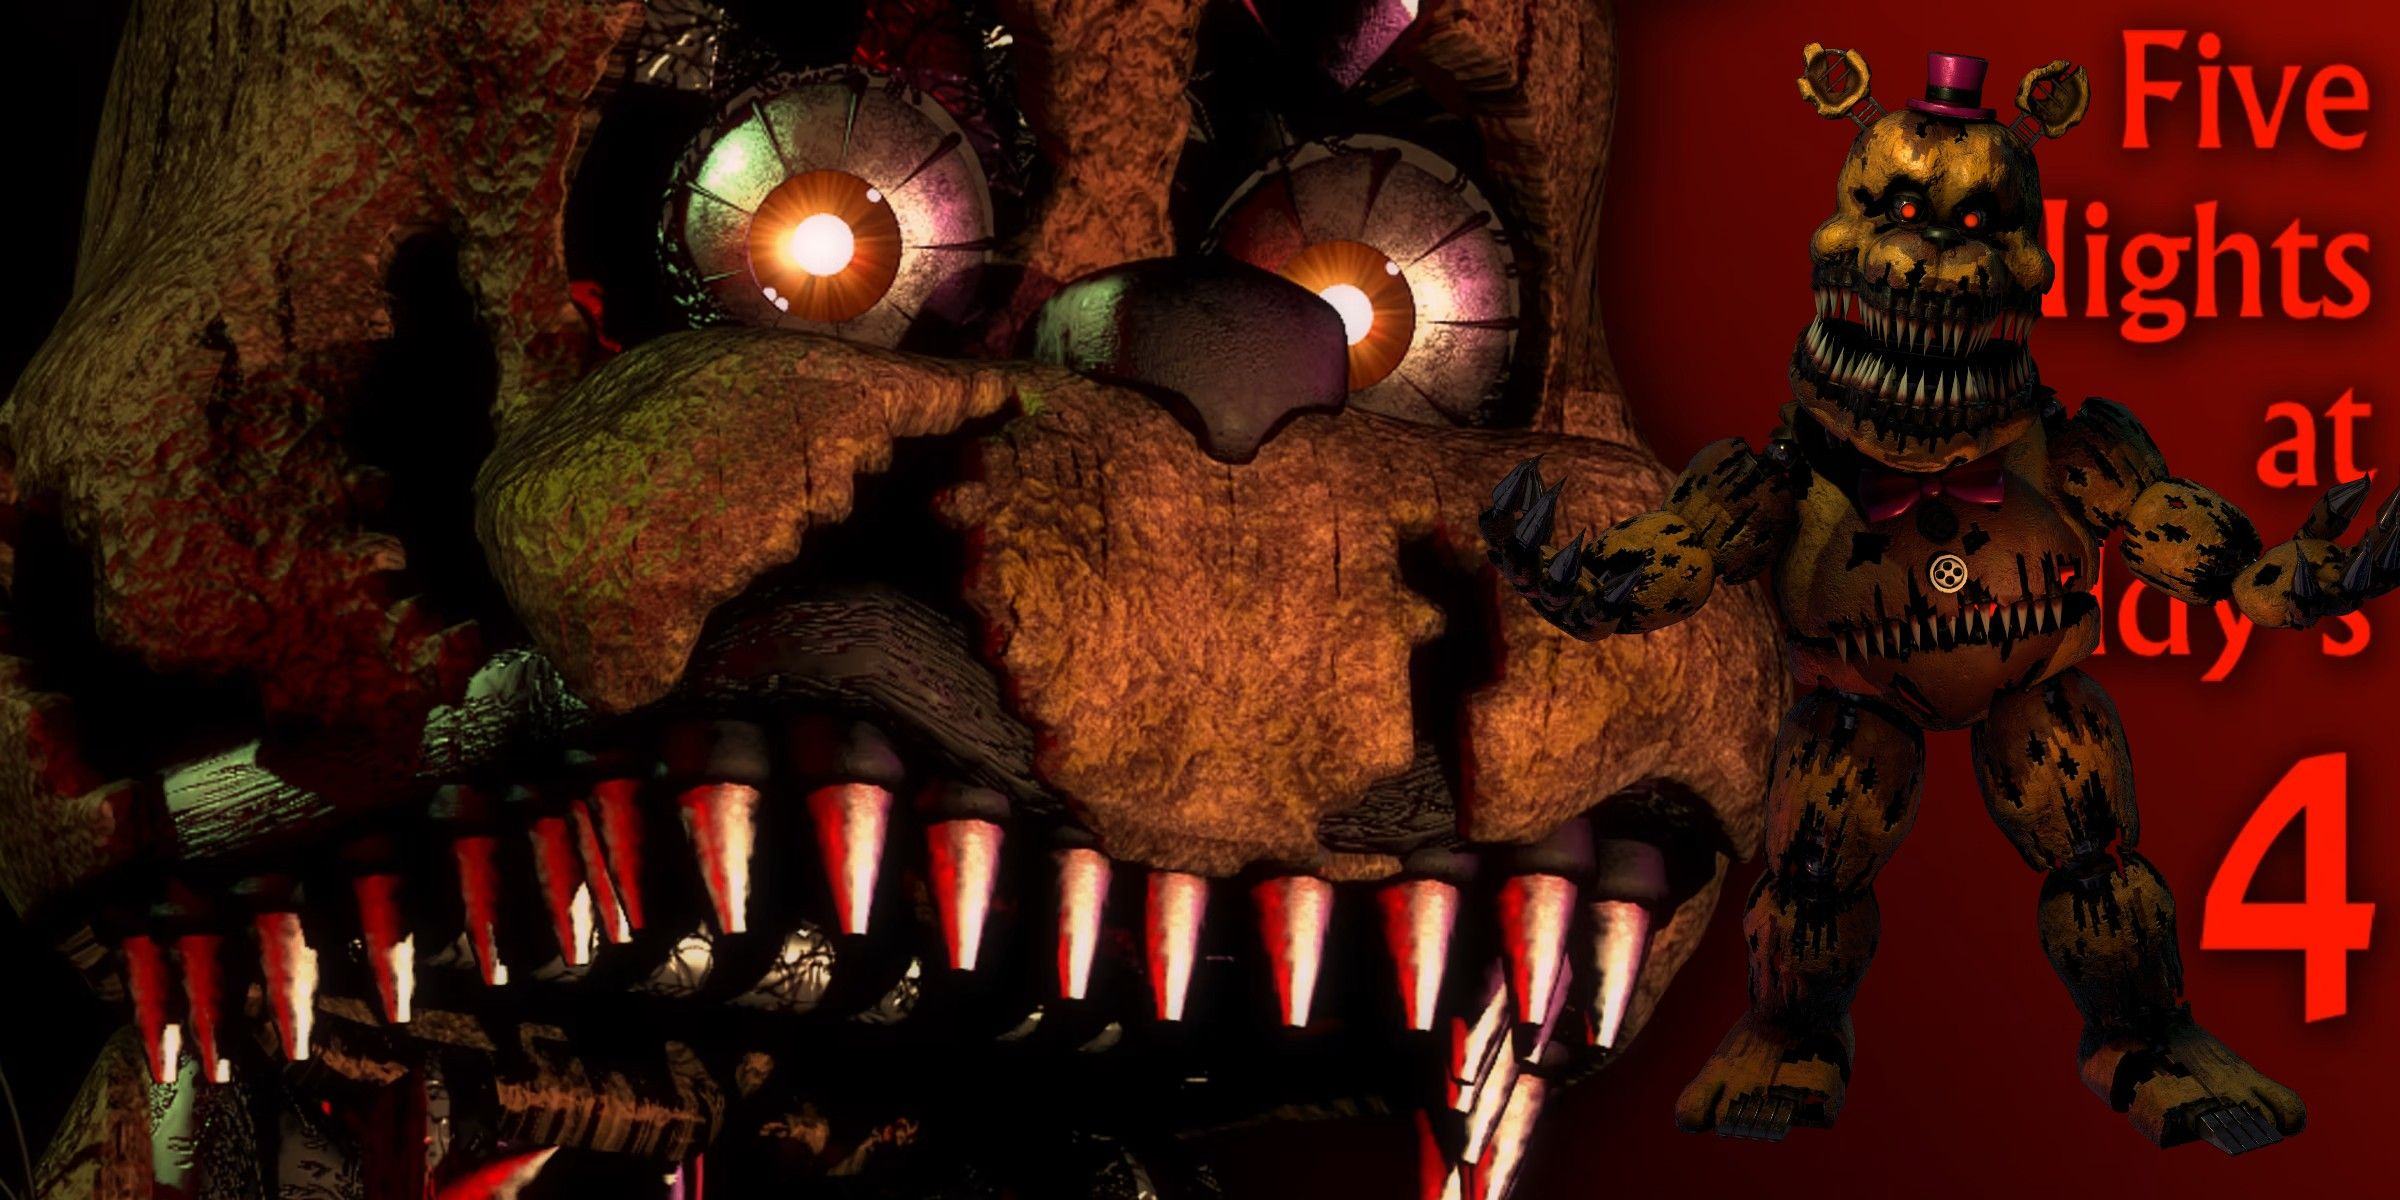 Nightmare Fred Bear animation on the banner for Five Nights at Freddy's 4.